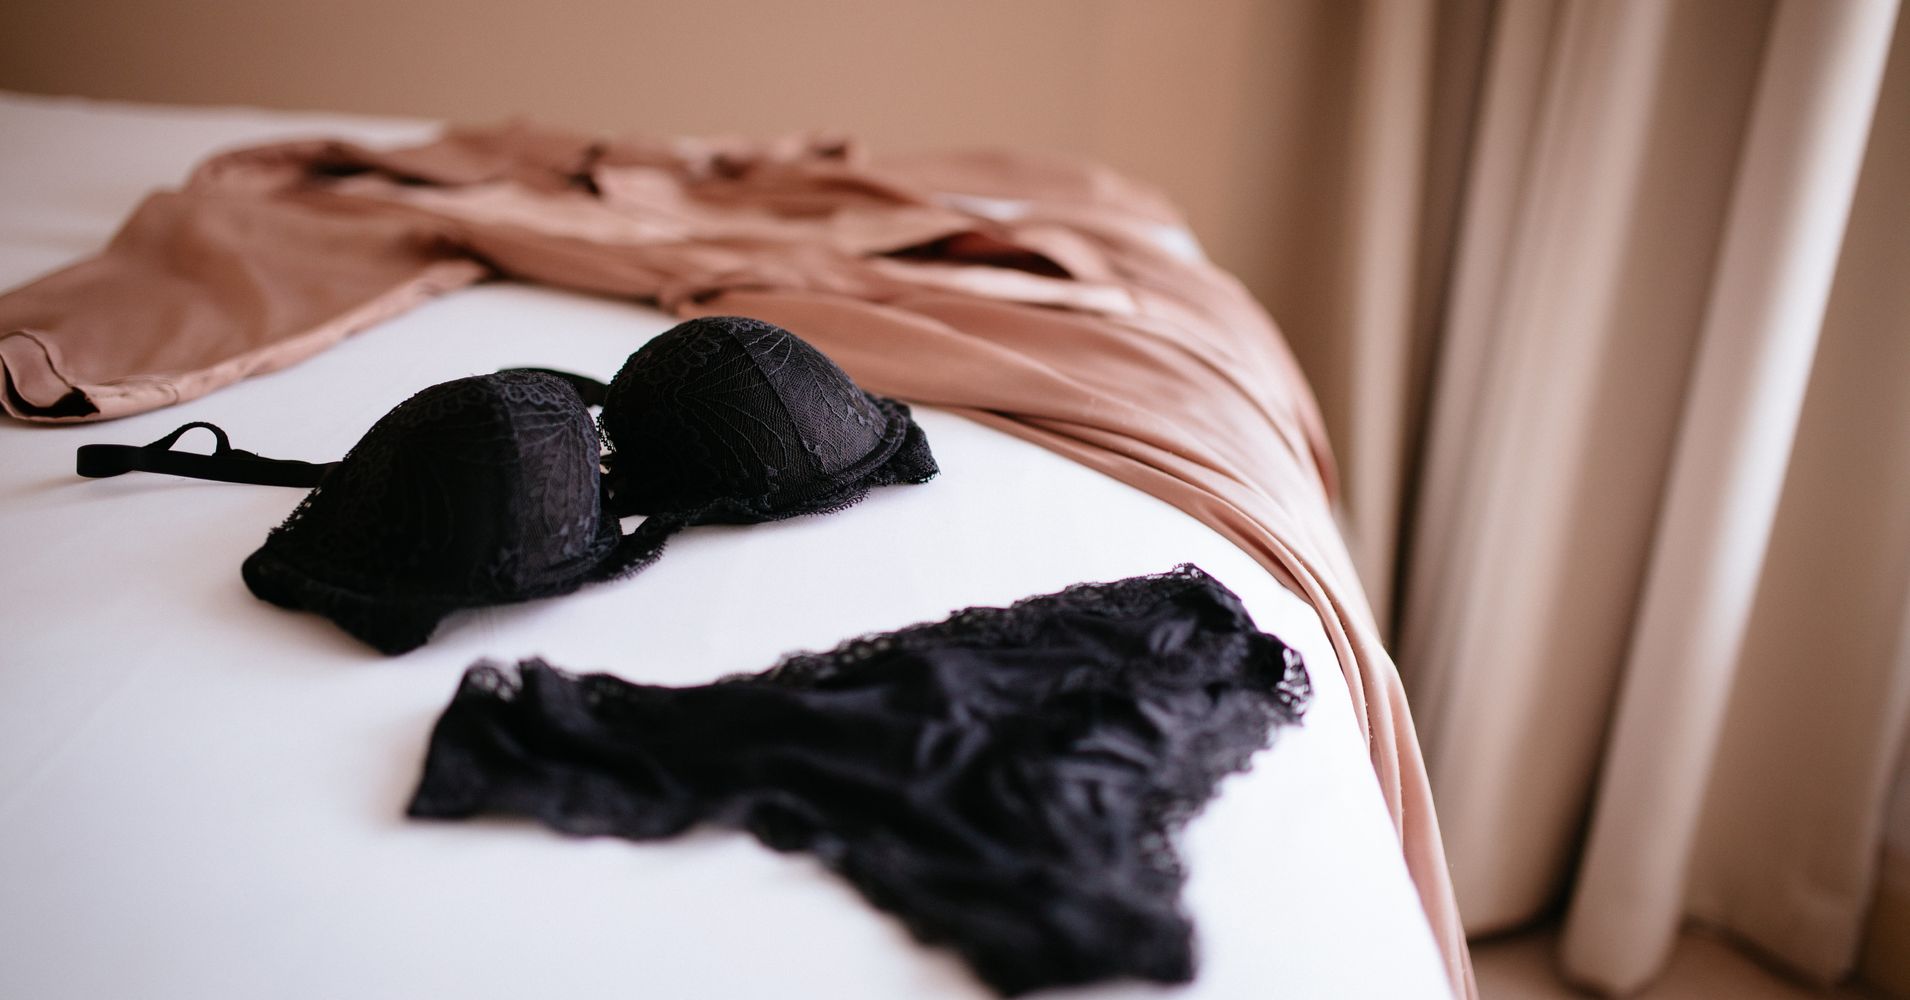 9 Pretty Little Lingerie Items To Get On Sale This Prime